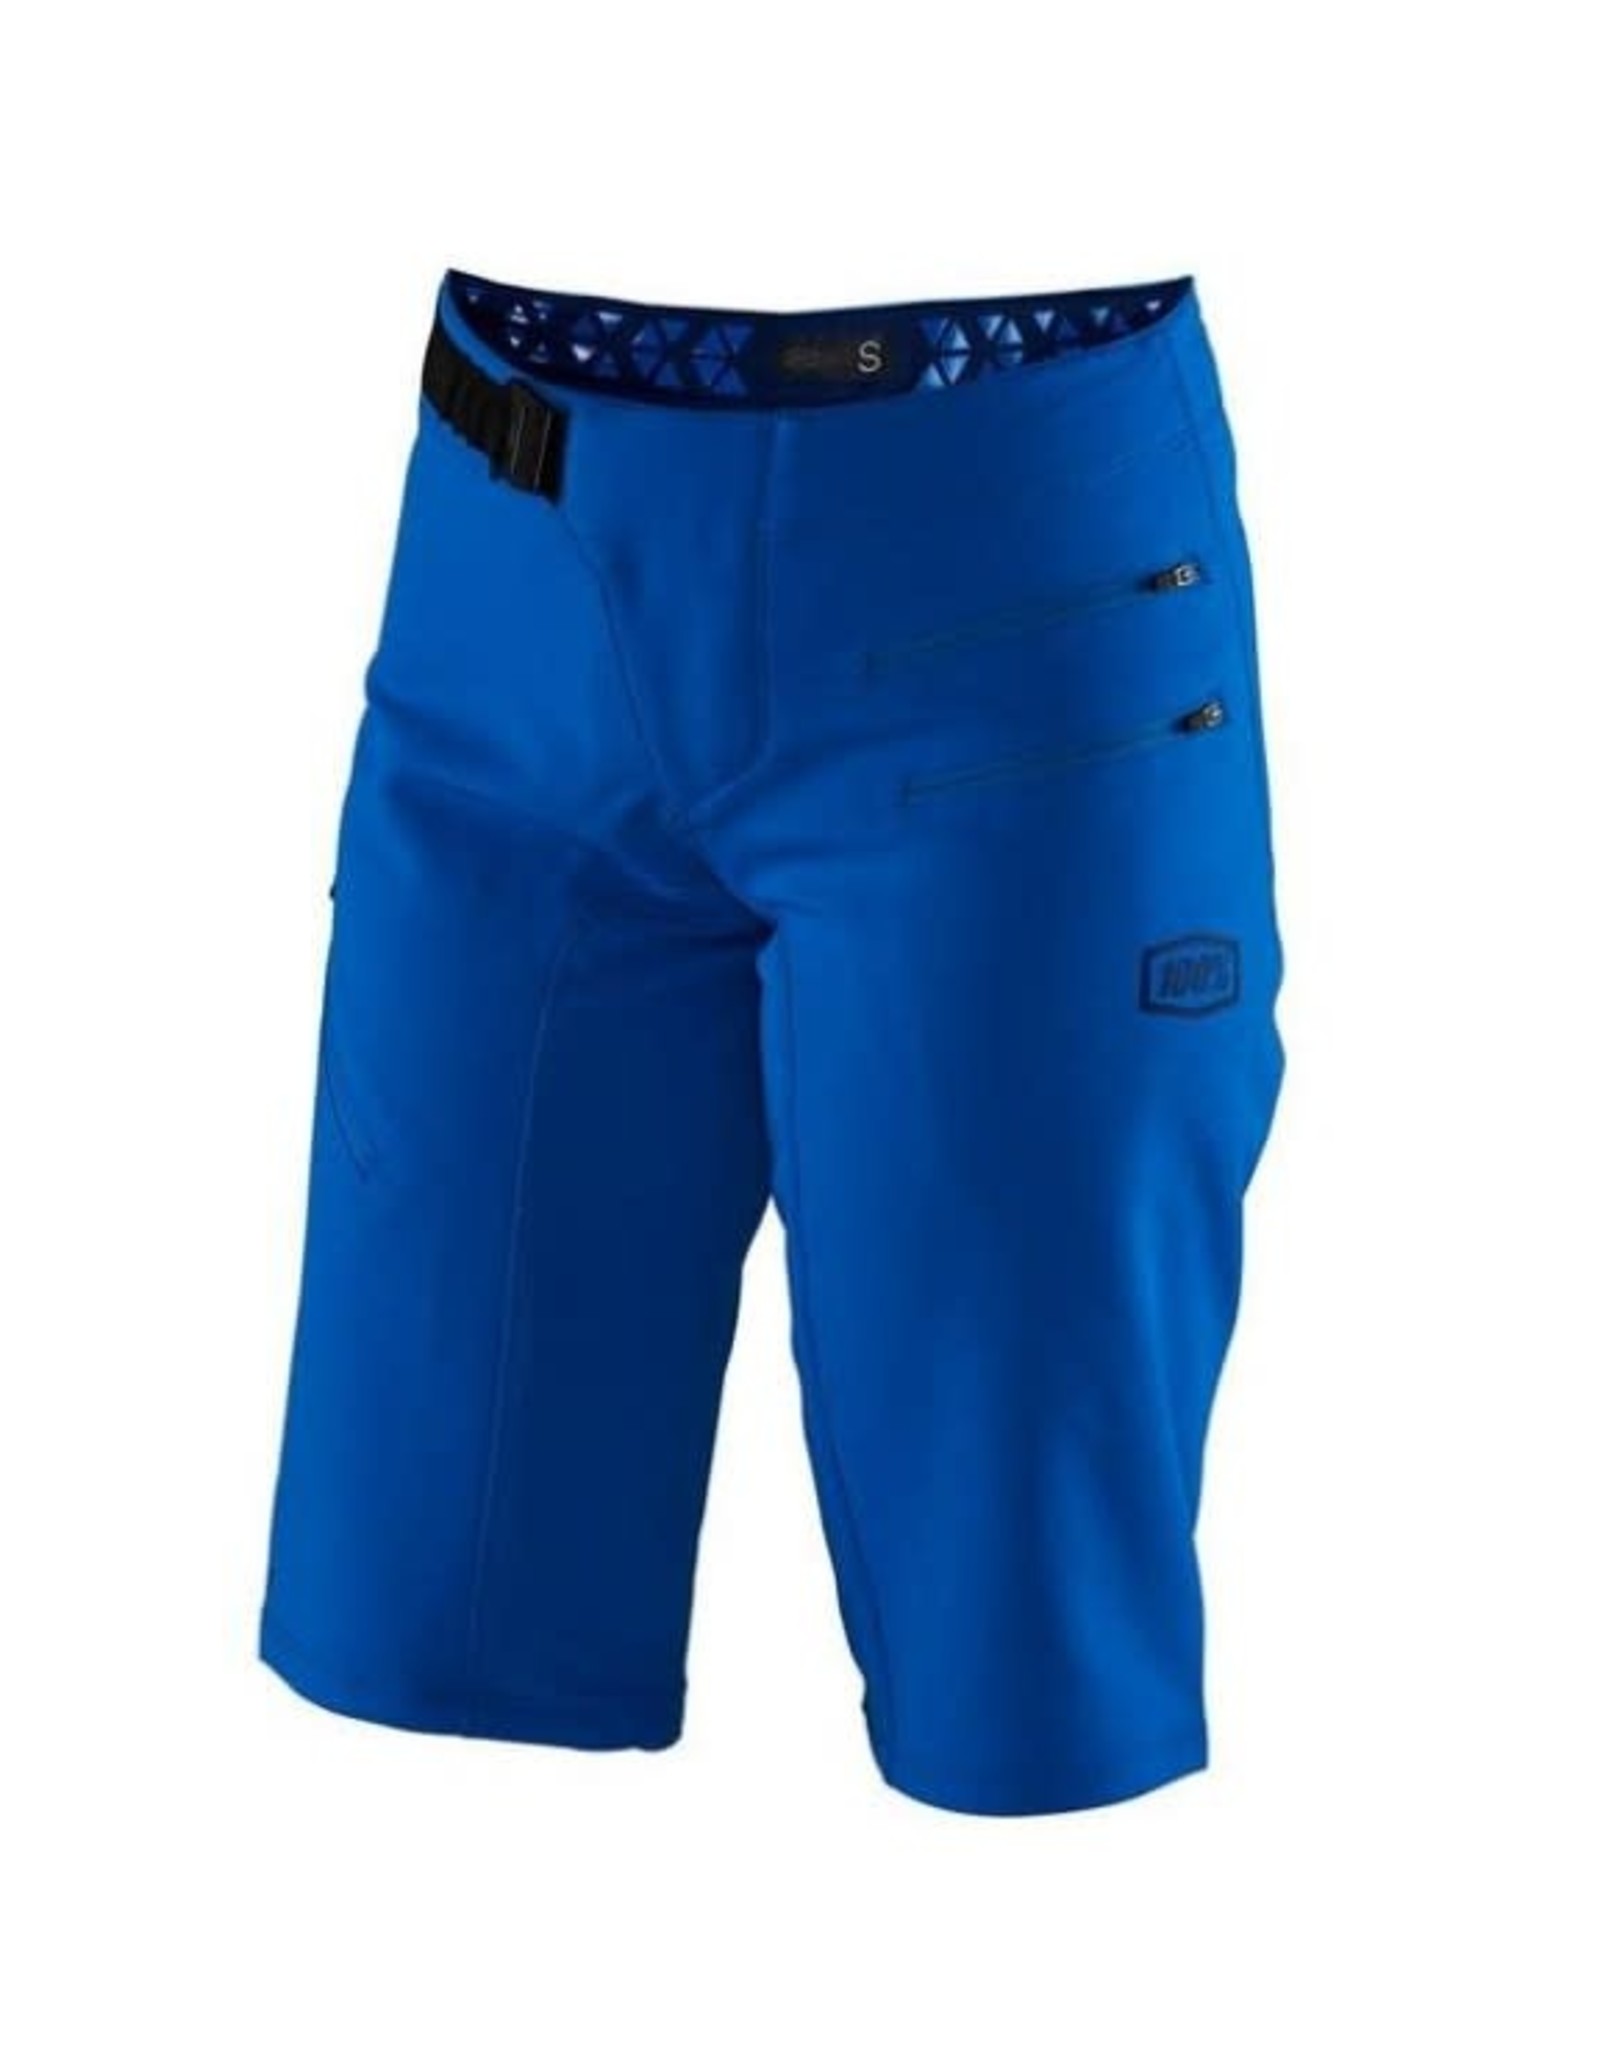 100% Shorts 100% Airmatic All Mountain Wm's (no liner)